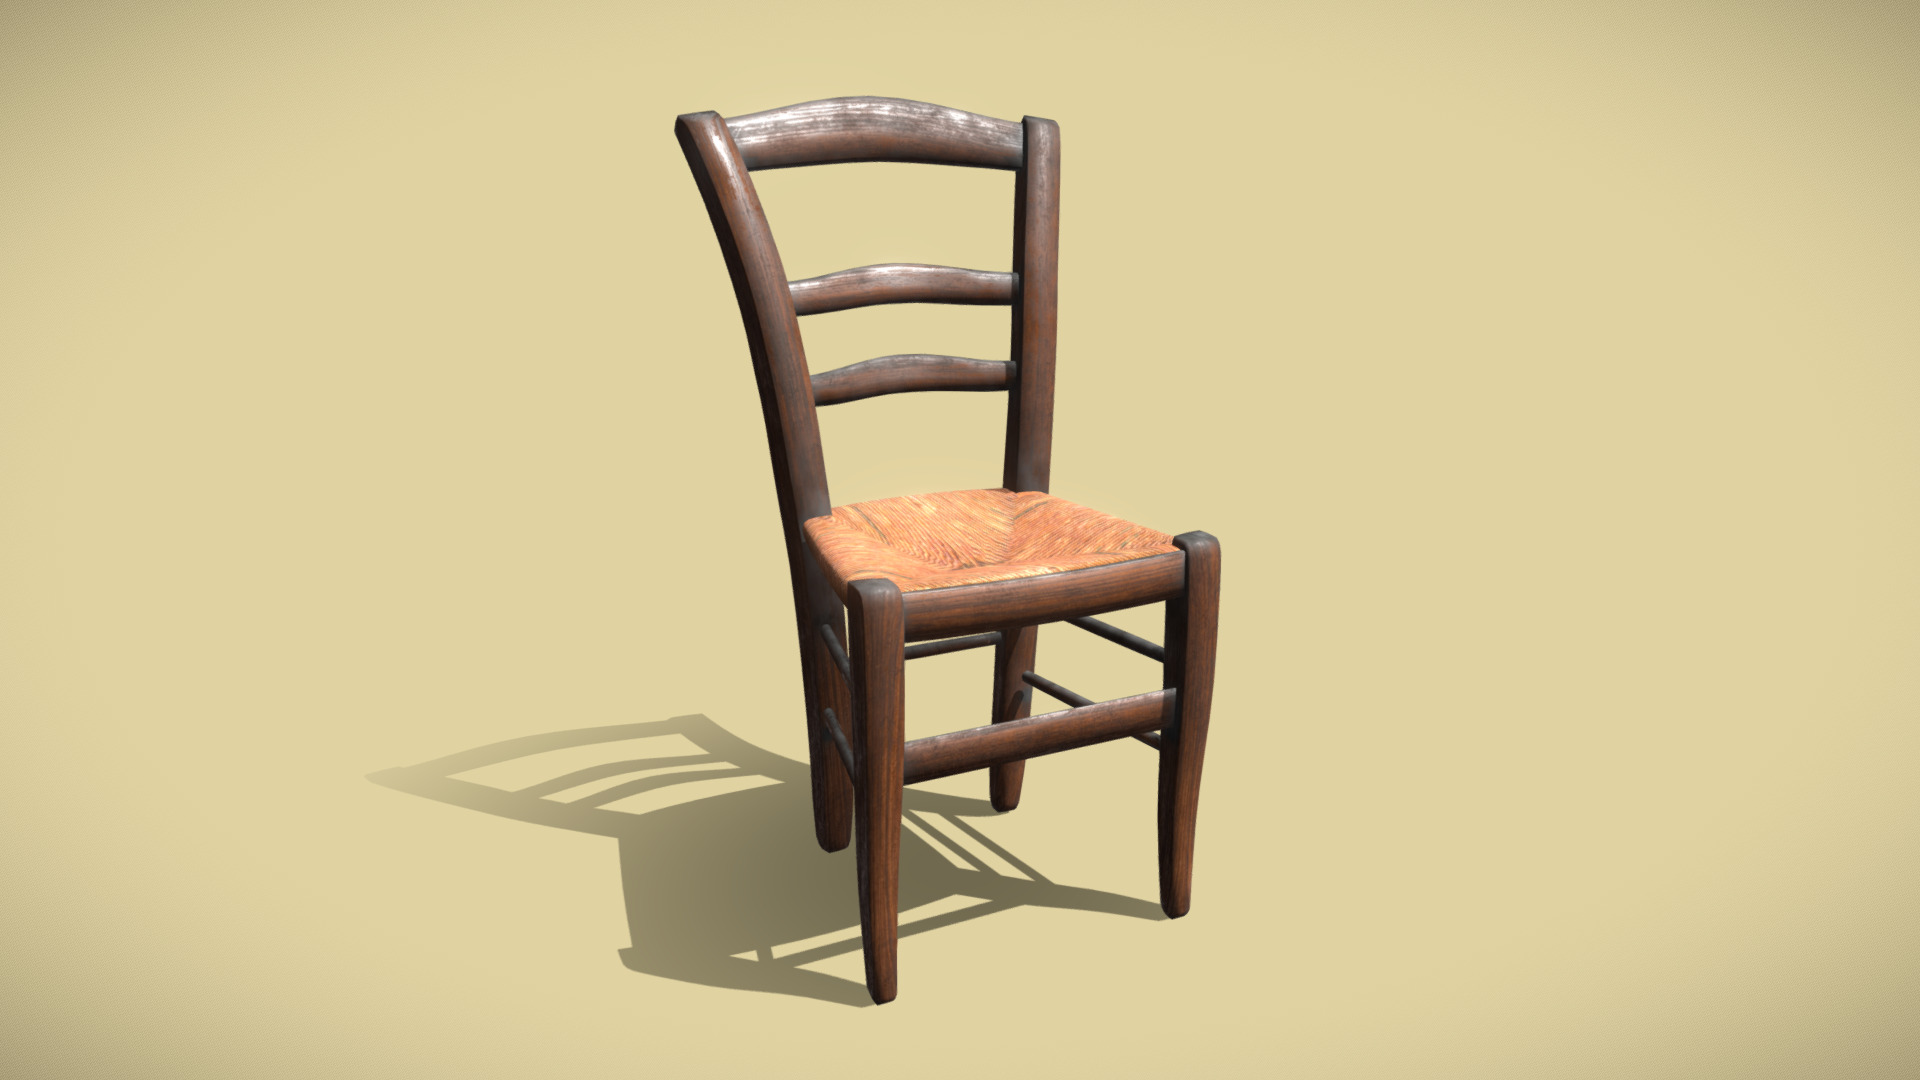 3D model Wood and cane rustic chair – PBR / Low-Poly - This is a 3D model of the Wood and cane rustic chair - PBR / Low-Poly. The 3D model is about a chair against a wall.